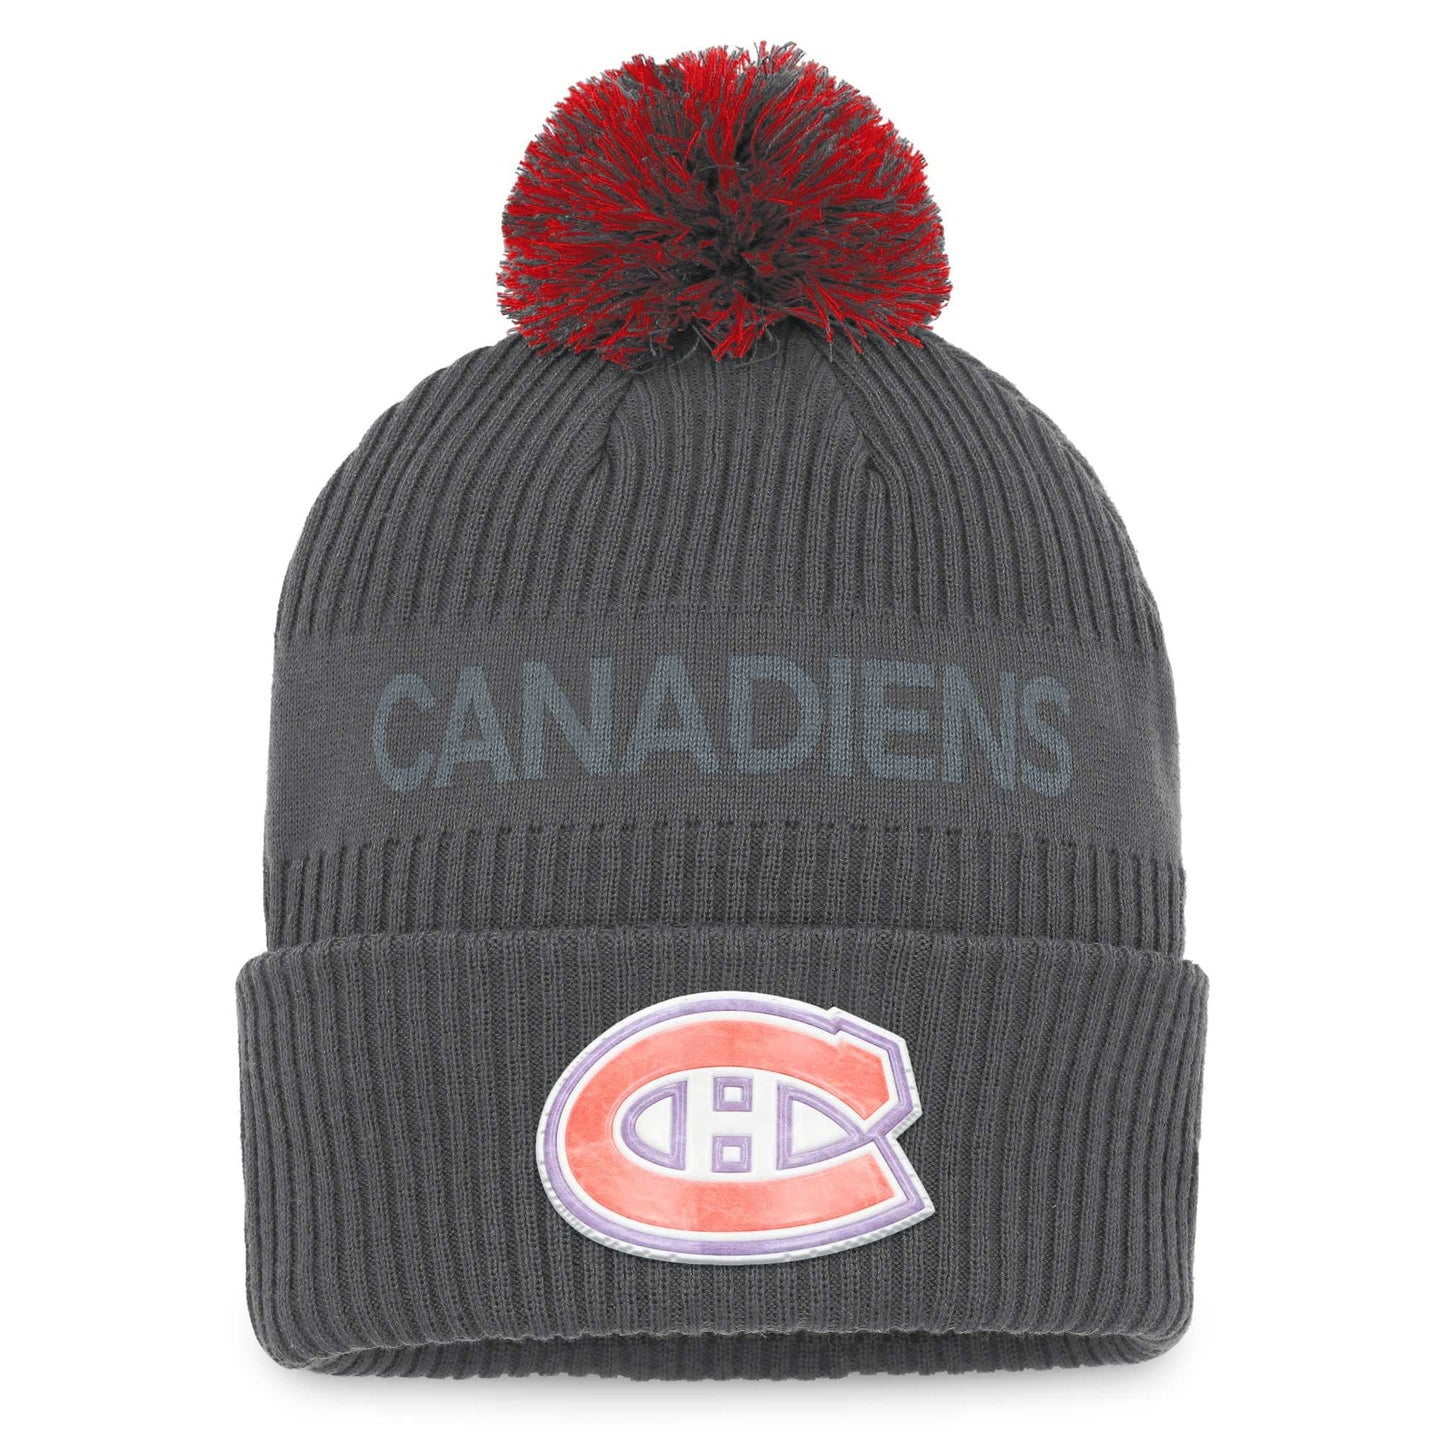 Men's Fanatics Branded Charcoal Montreal Canadiens Authentic Pro Home Ice Cuffed Knit Hat with Pom - OSFA